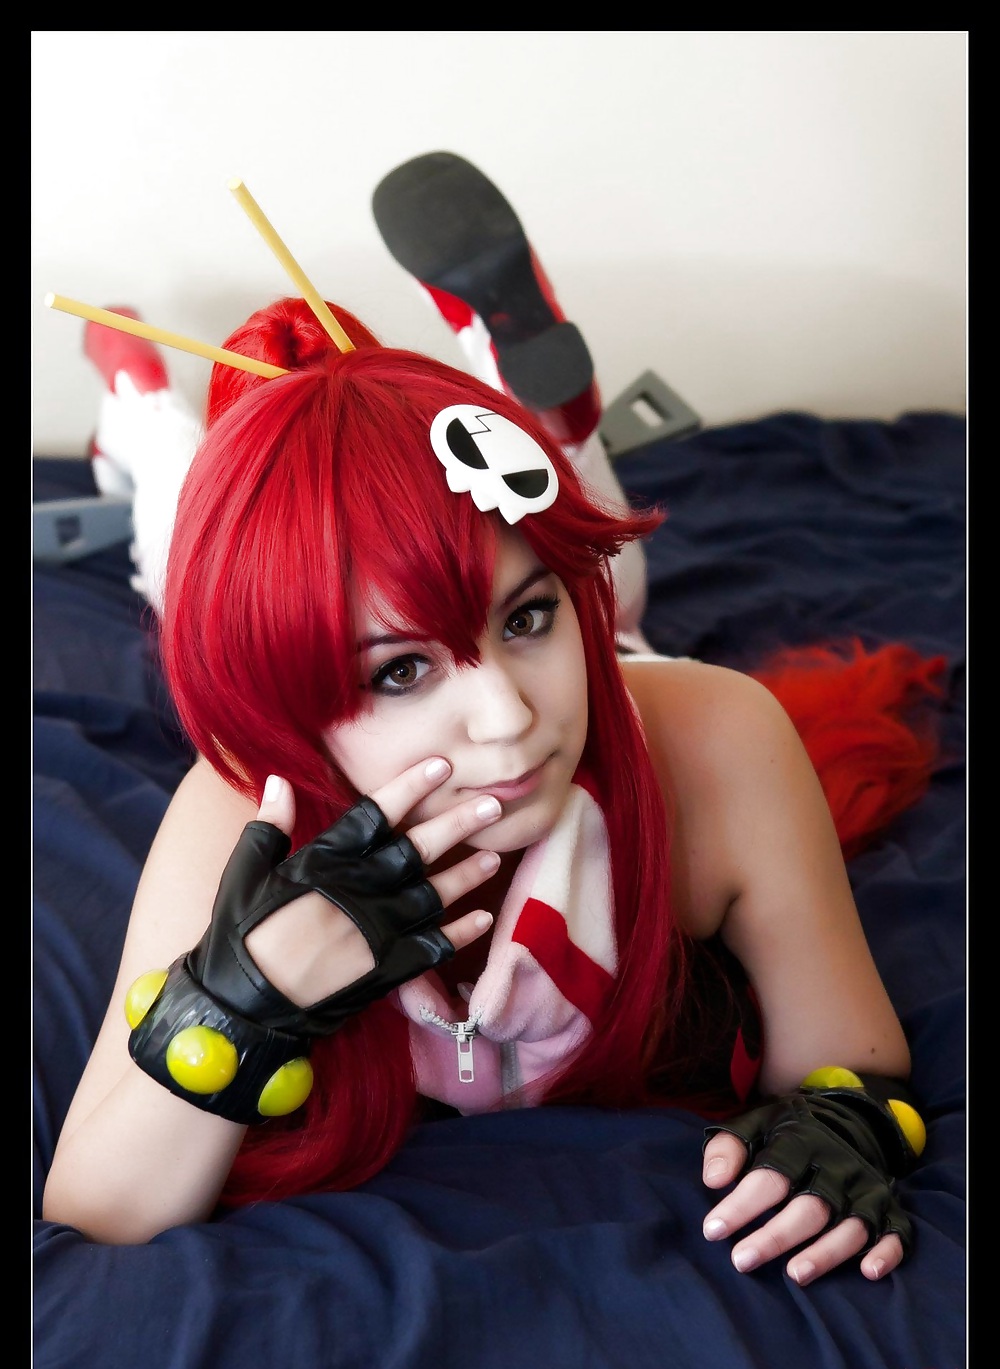 Cosplay Beautiful Busty Whore pict gal